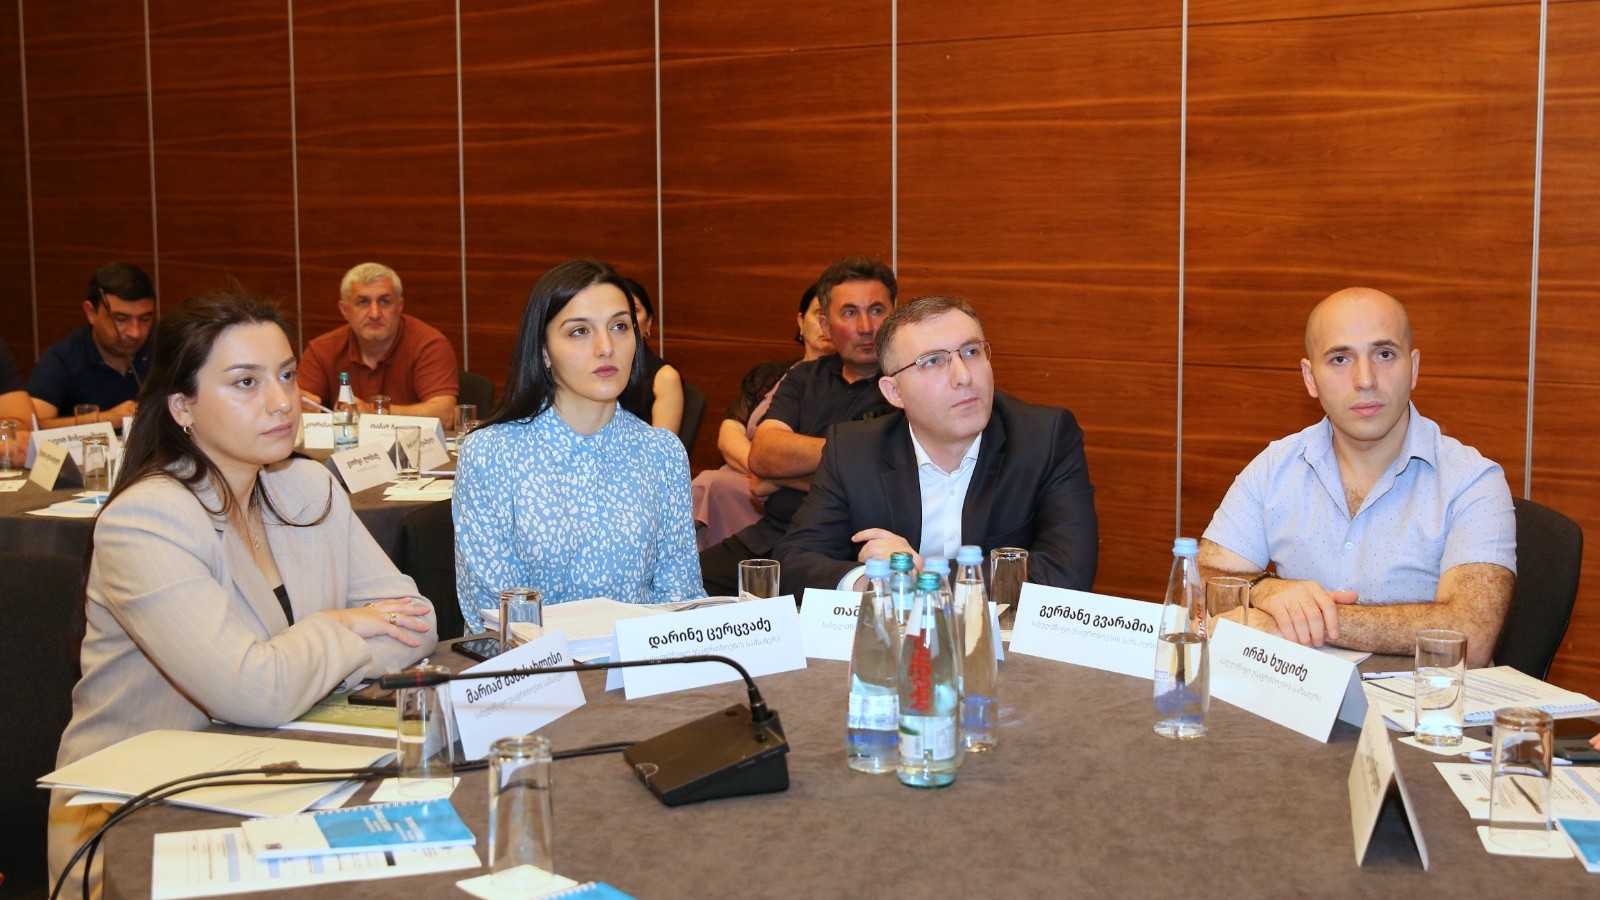 Representatives of Georgian municipalities are better informed on importance of corruption prevention in the public sector